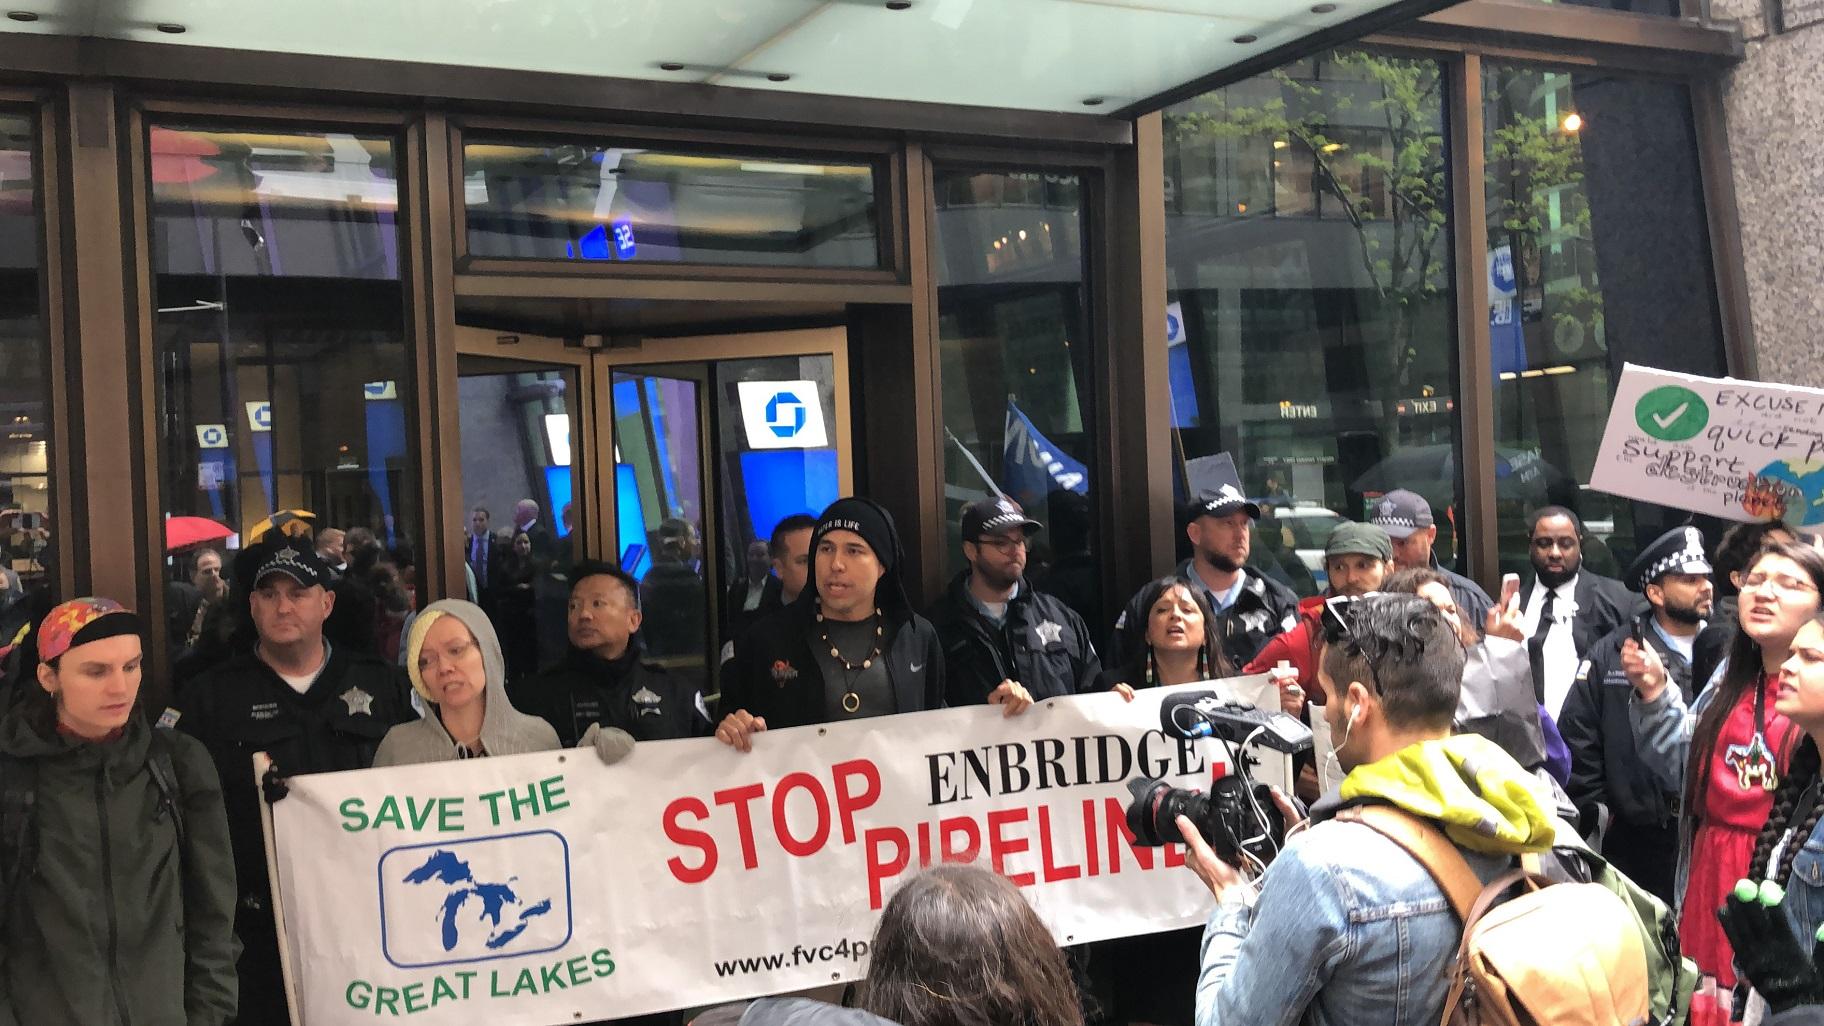 Environmental activists rallied outside Chase Tower in Chicago on Tuesday, May 21, 2019 to protest JPMorgan Chase & Company’s financing of fossil fuel projects. (Alex Ruppenthal / WTTW)